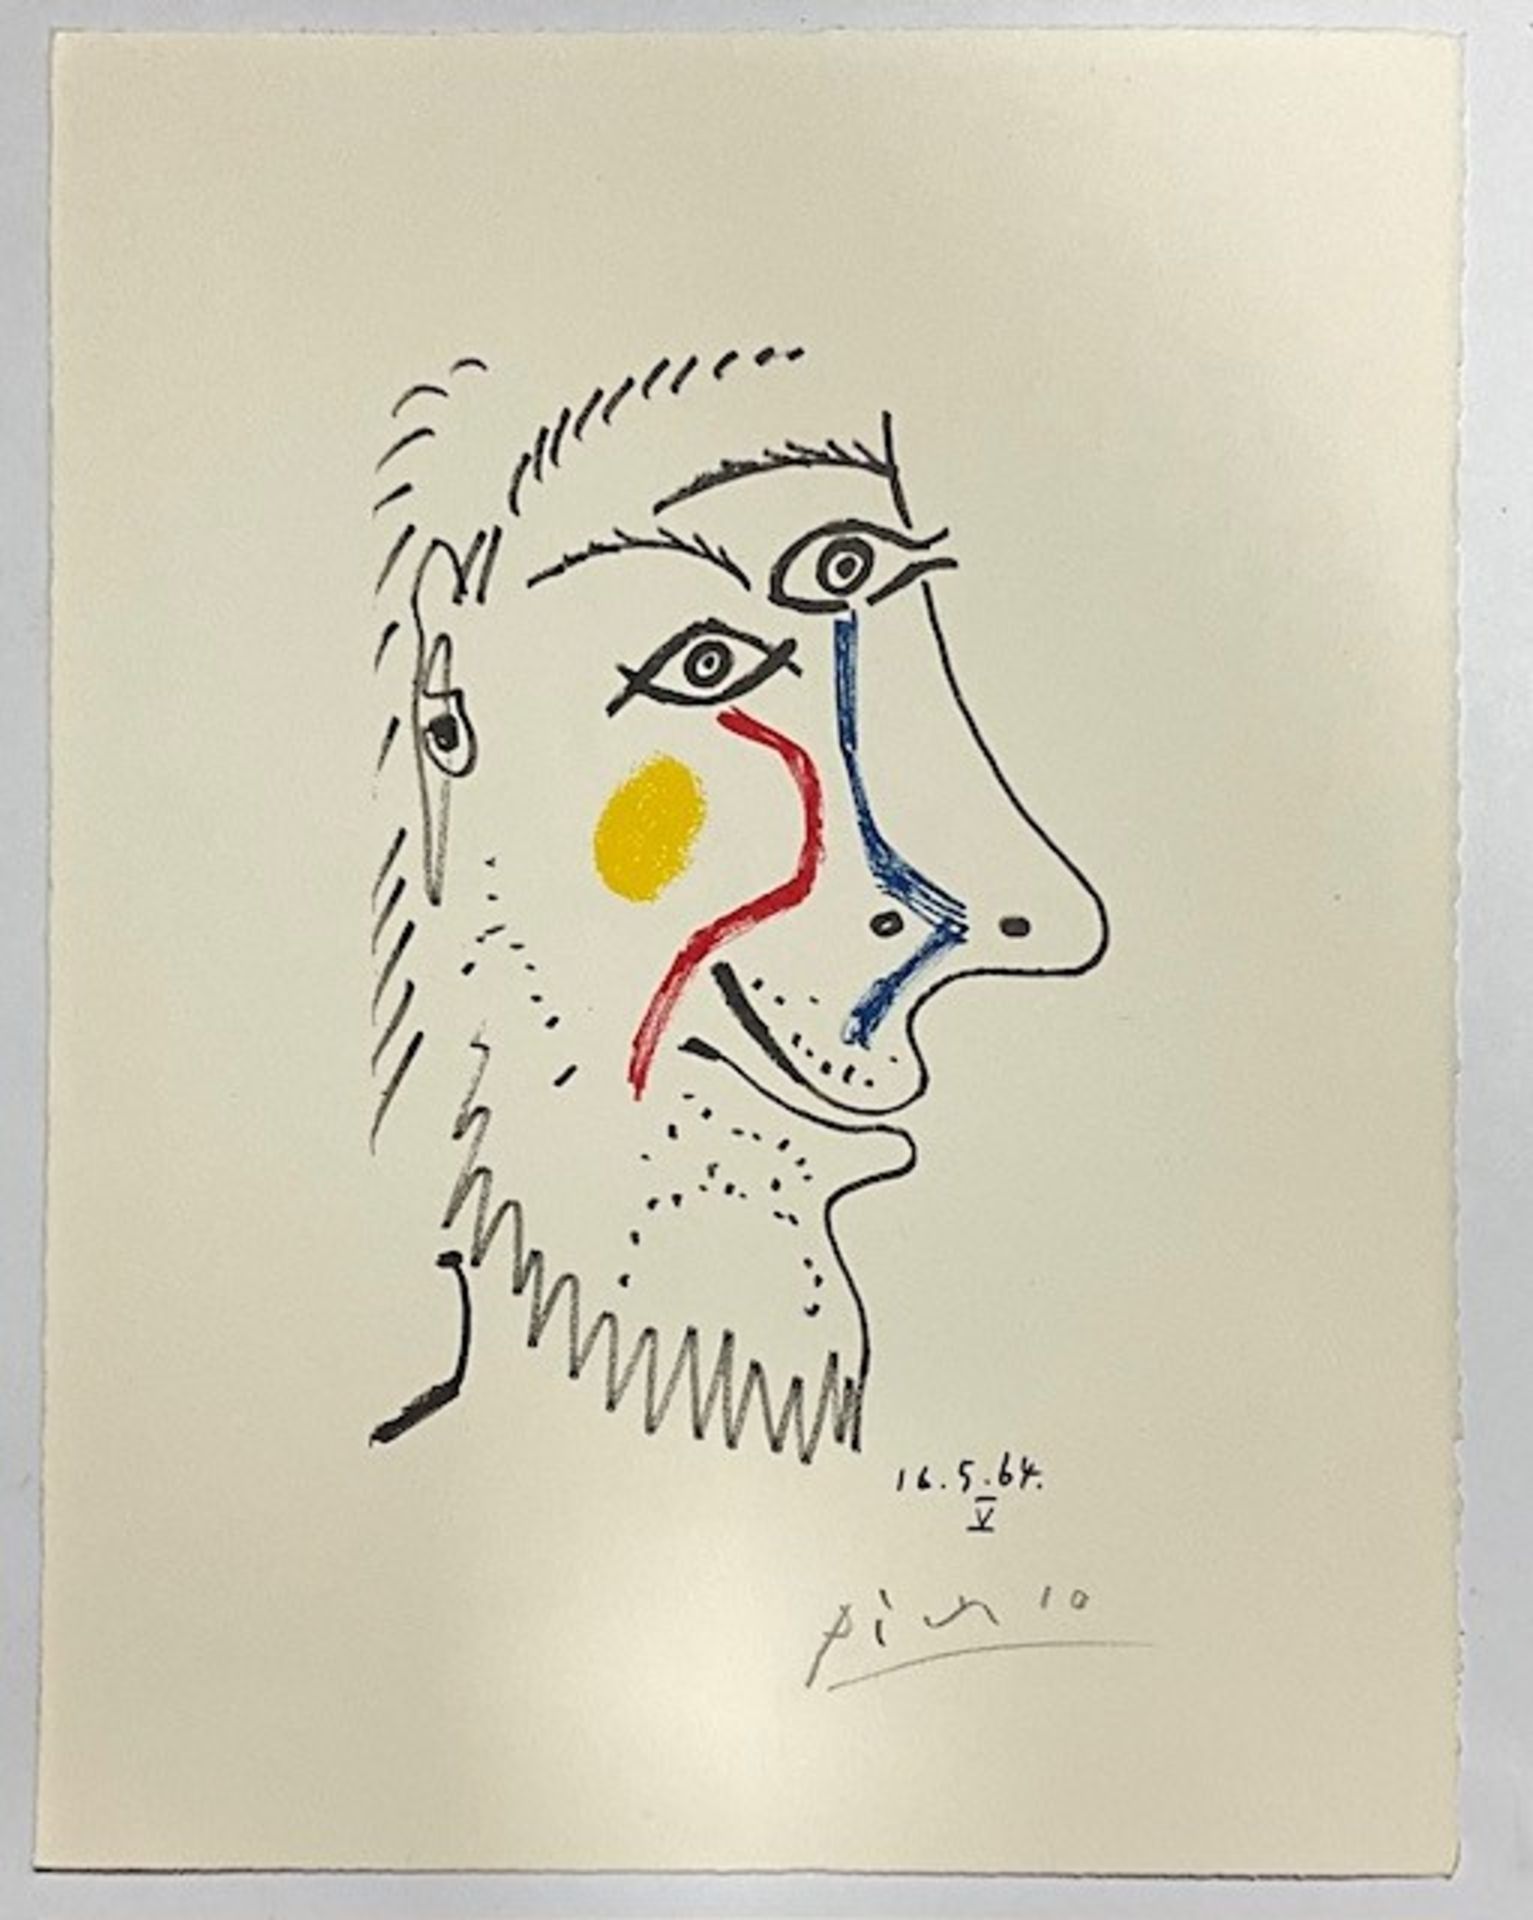 Pablo Picasso Hand Signed Lithograph on Arches Paper